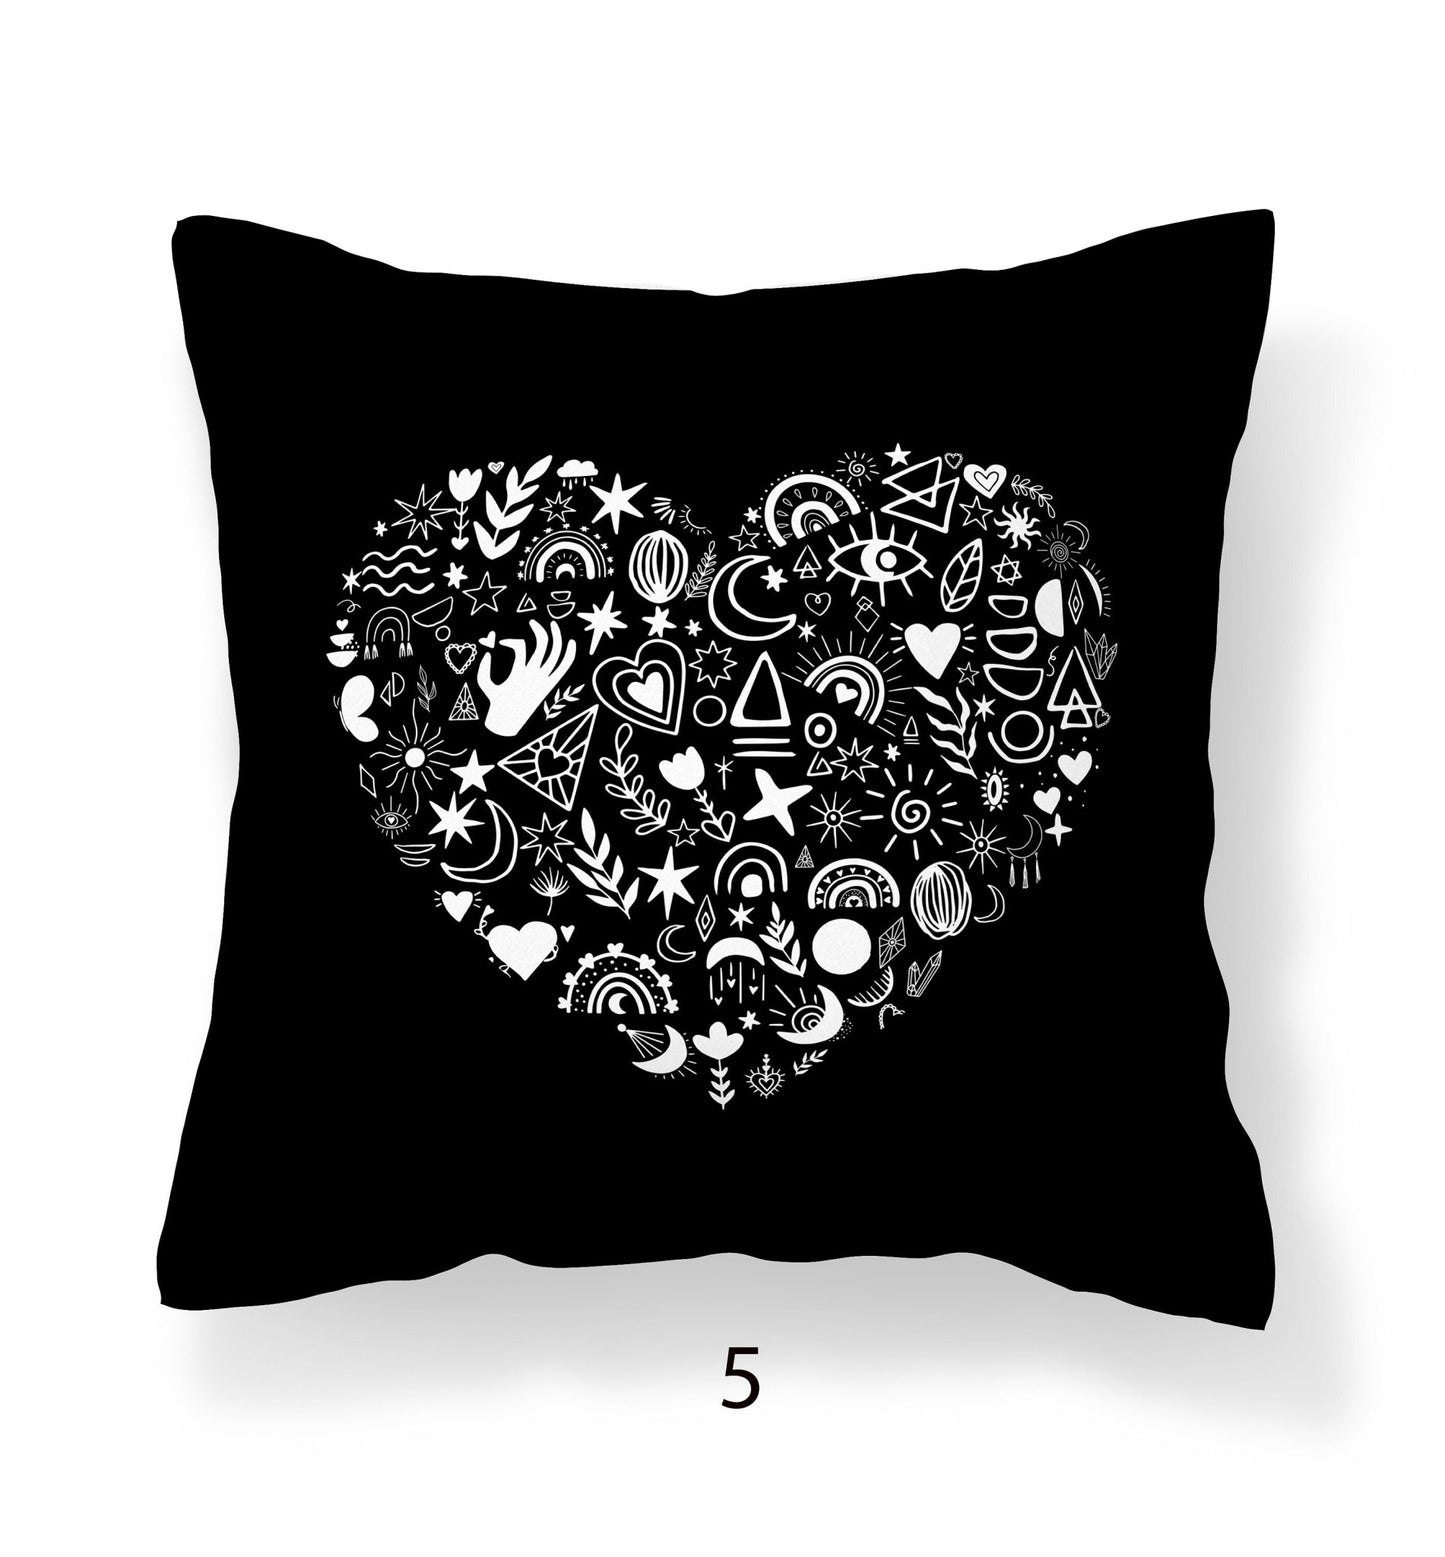 Aesthetic Pillows Black and White